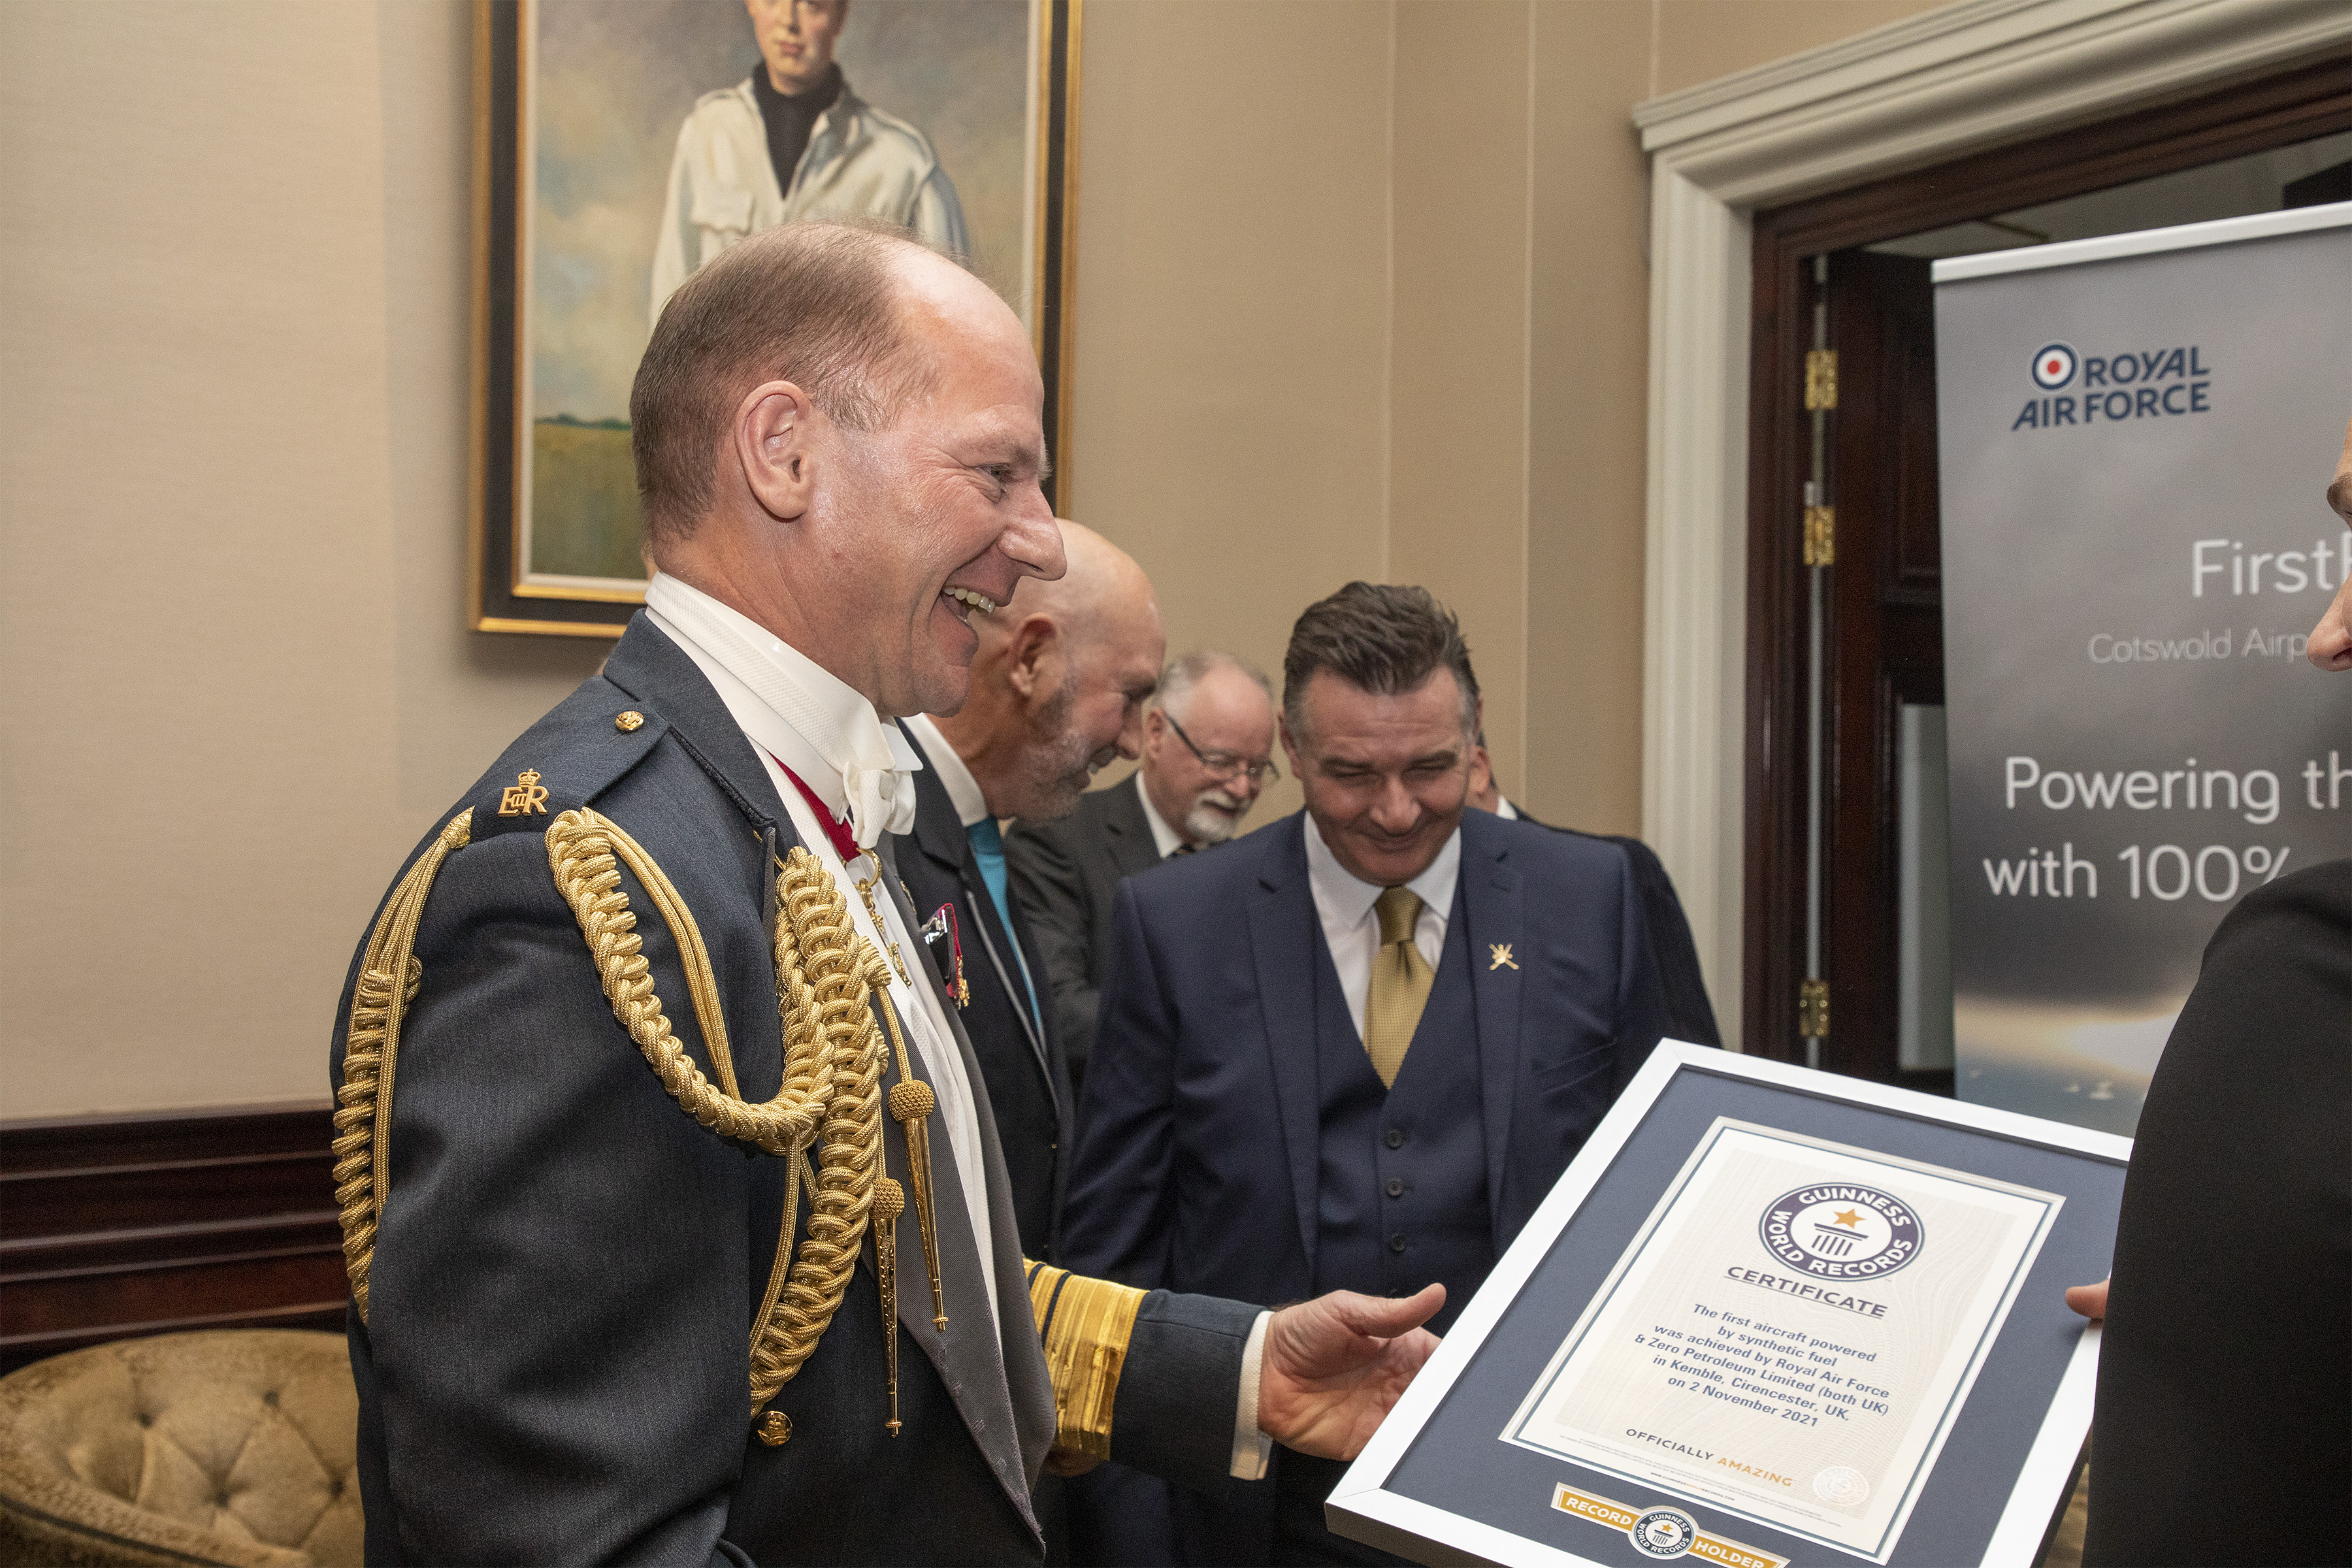 Air Chief Marshal Sir Mike Wigston holds the Guinness Book of Records Award.